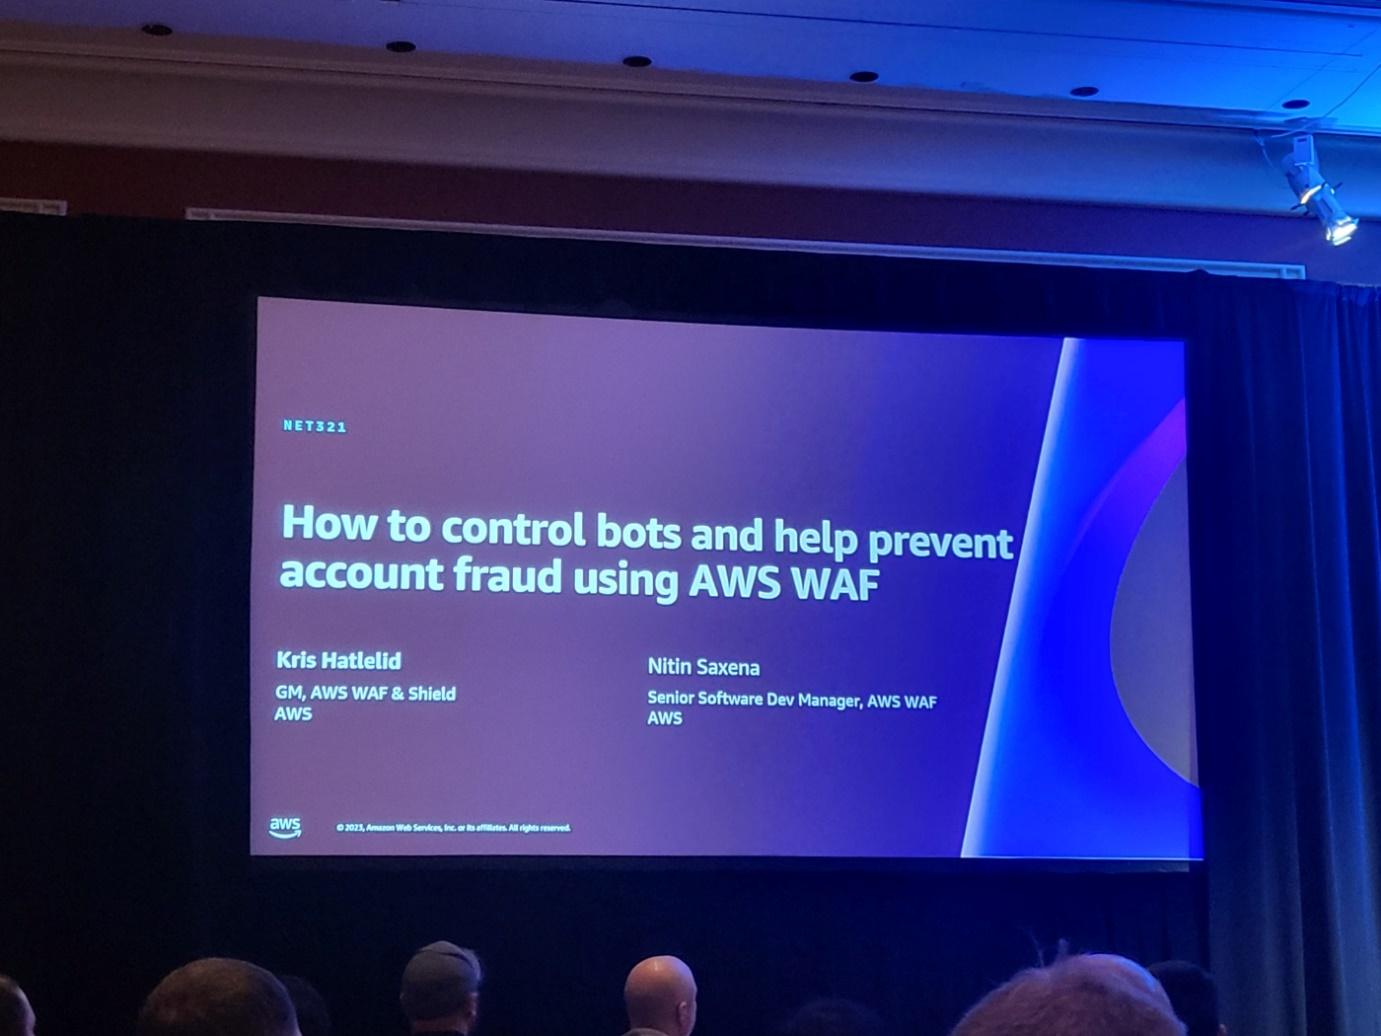 How to control bots and help prevent account fraud using AWS WAF